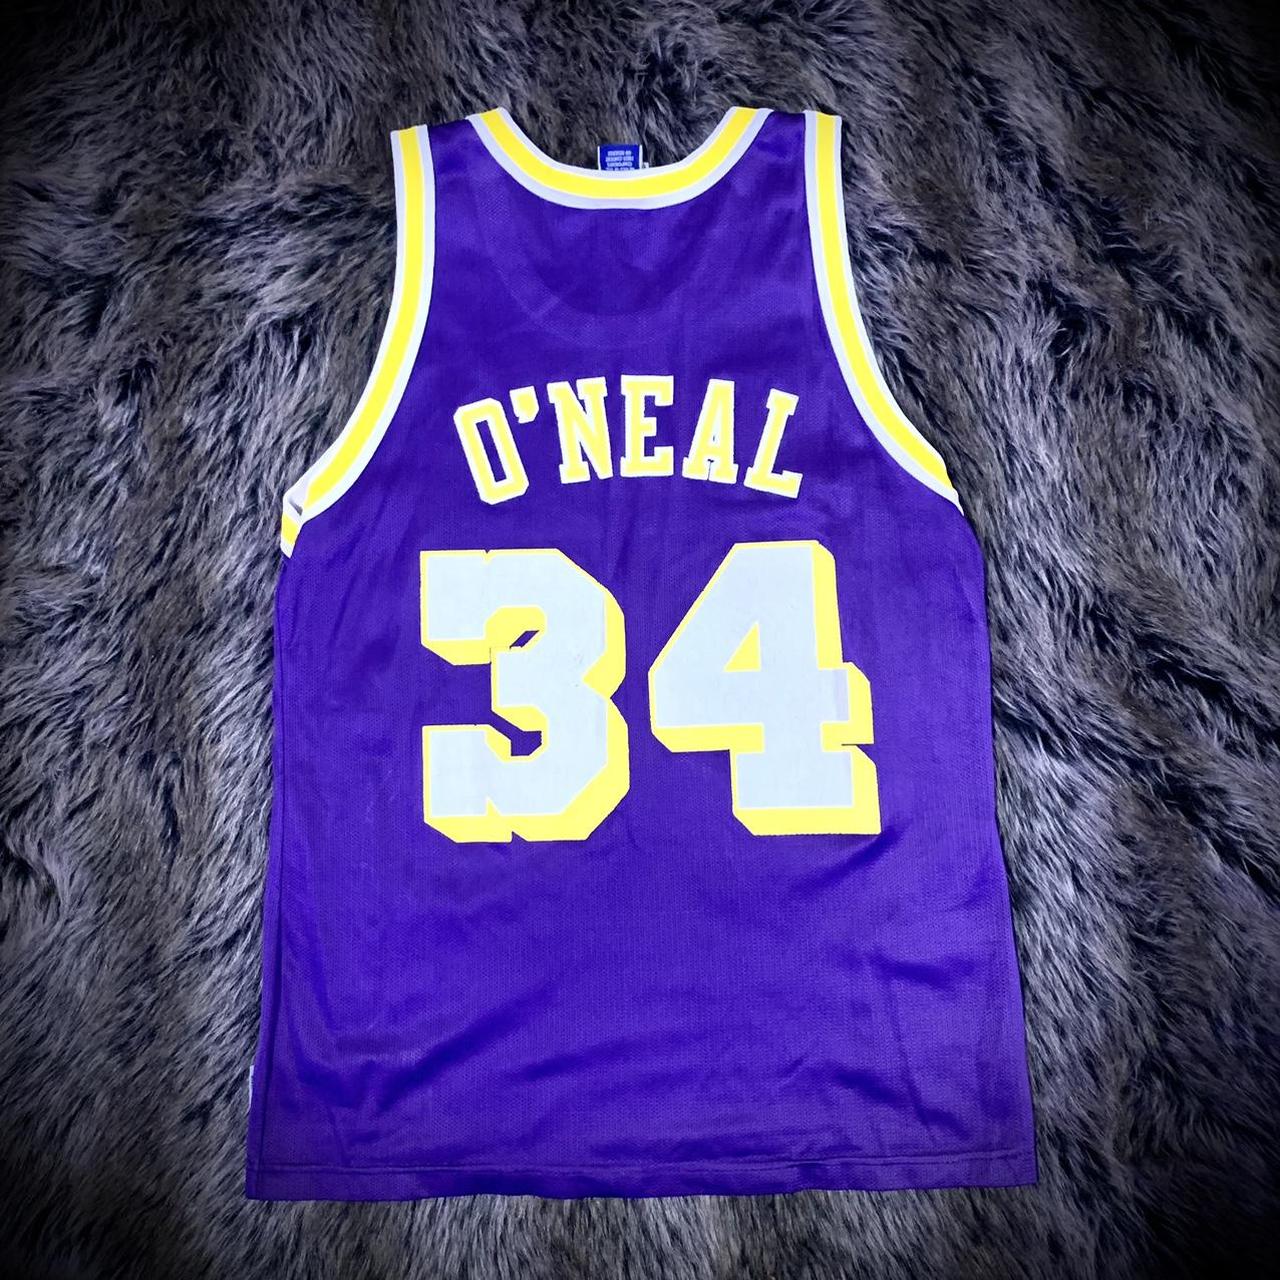 Vintage Shaquille O'neal LA Lakers Champion Jersey Shaq 90s NBA